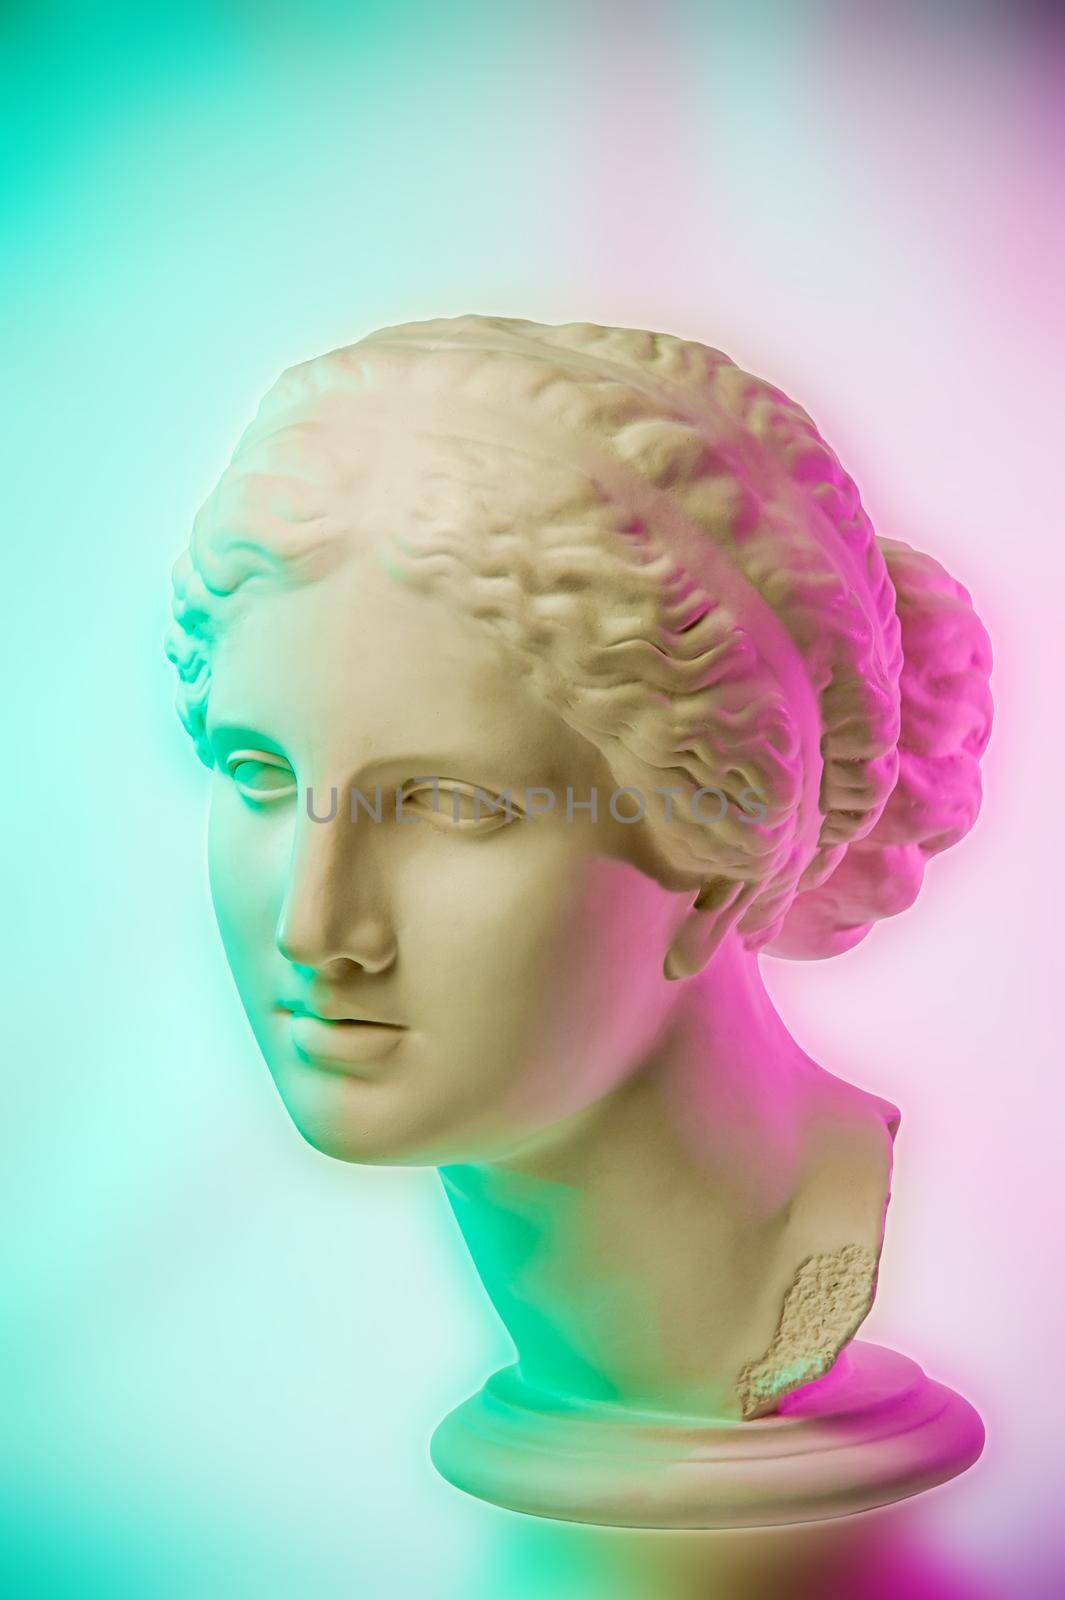 Statue of Venus de Milo. Creative concept colorful neon image with ancient greek sculpture Venus or Aphrodite head. Webpunk, vaporwave and surreal art style. Pink and green duotone effects. by bashta